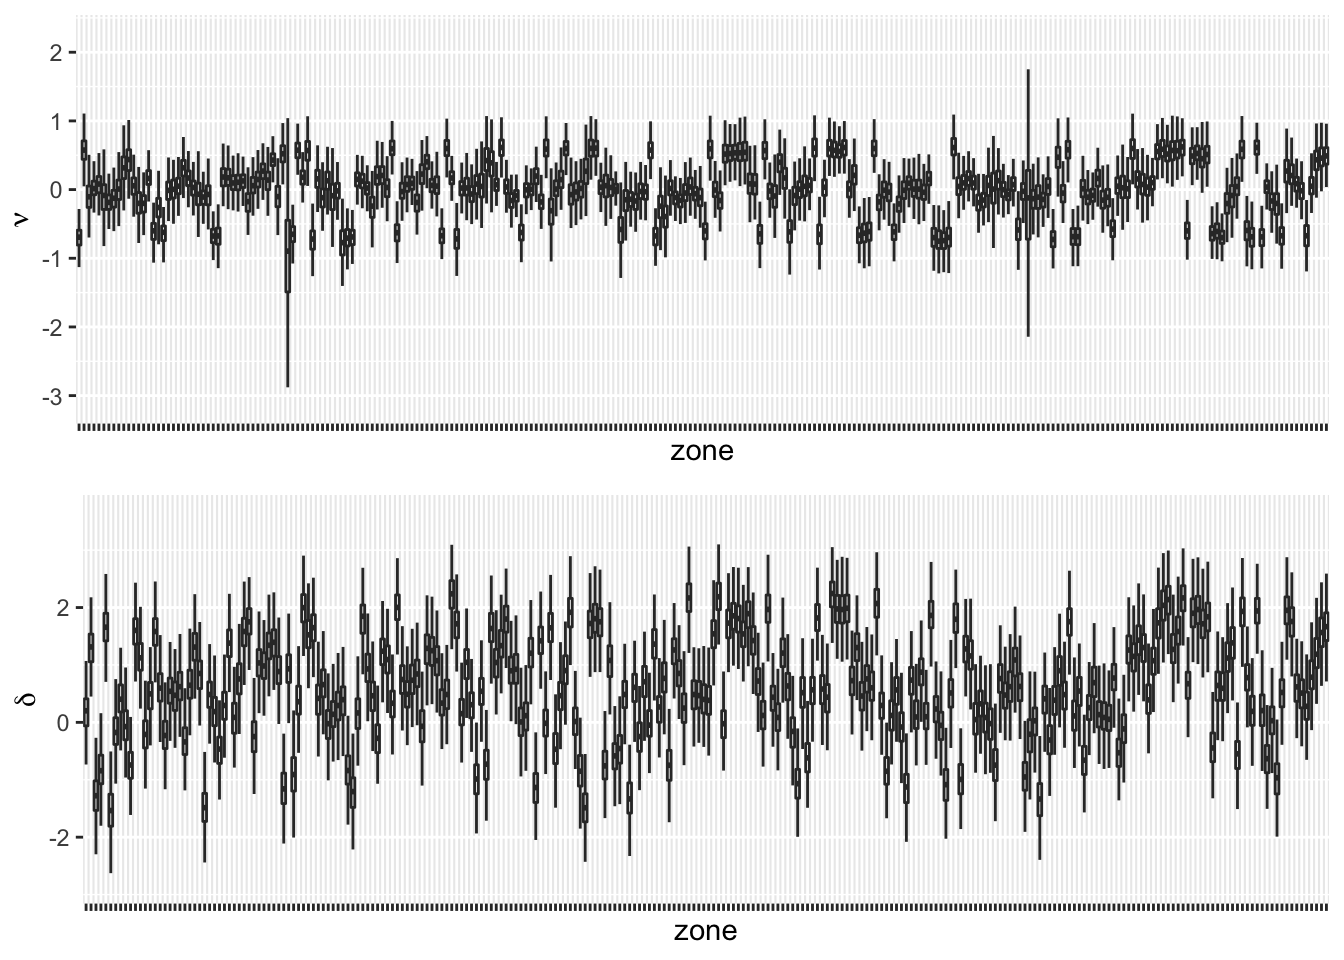 Boxplots of $\nu_i$ (top panel) and boxplots of $\delta_{it}$ averaged over time (bottom panel) for 252 zones.